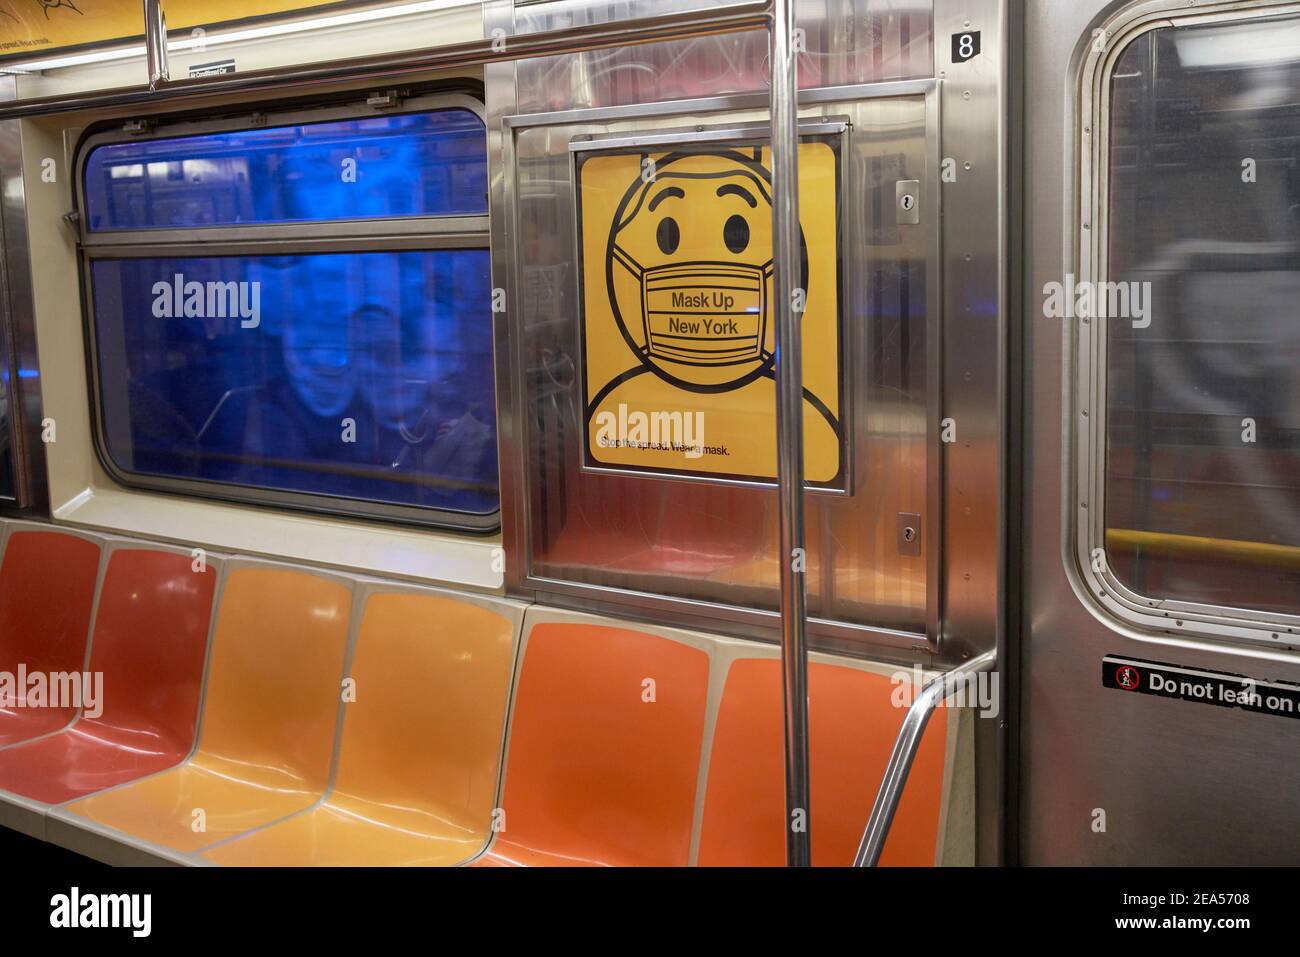 Mask up New York poster inside an empty subway train Stock Photo